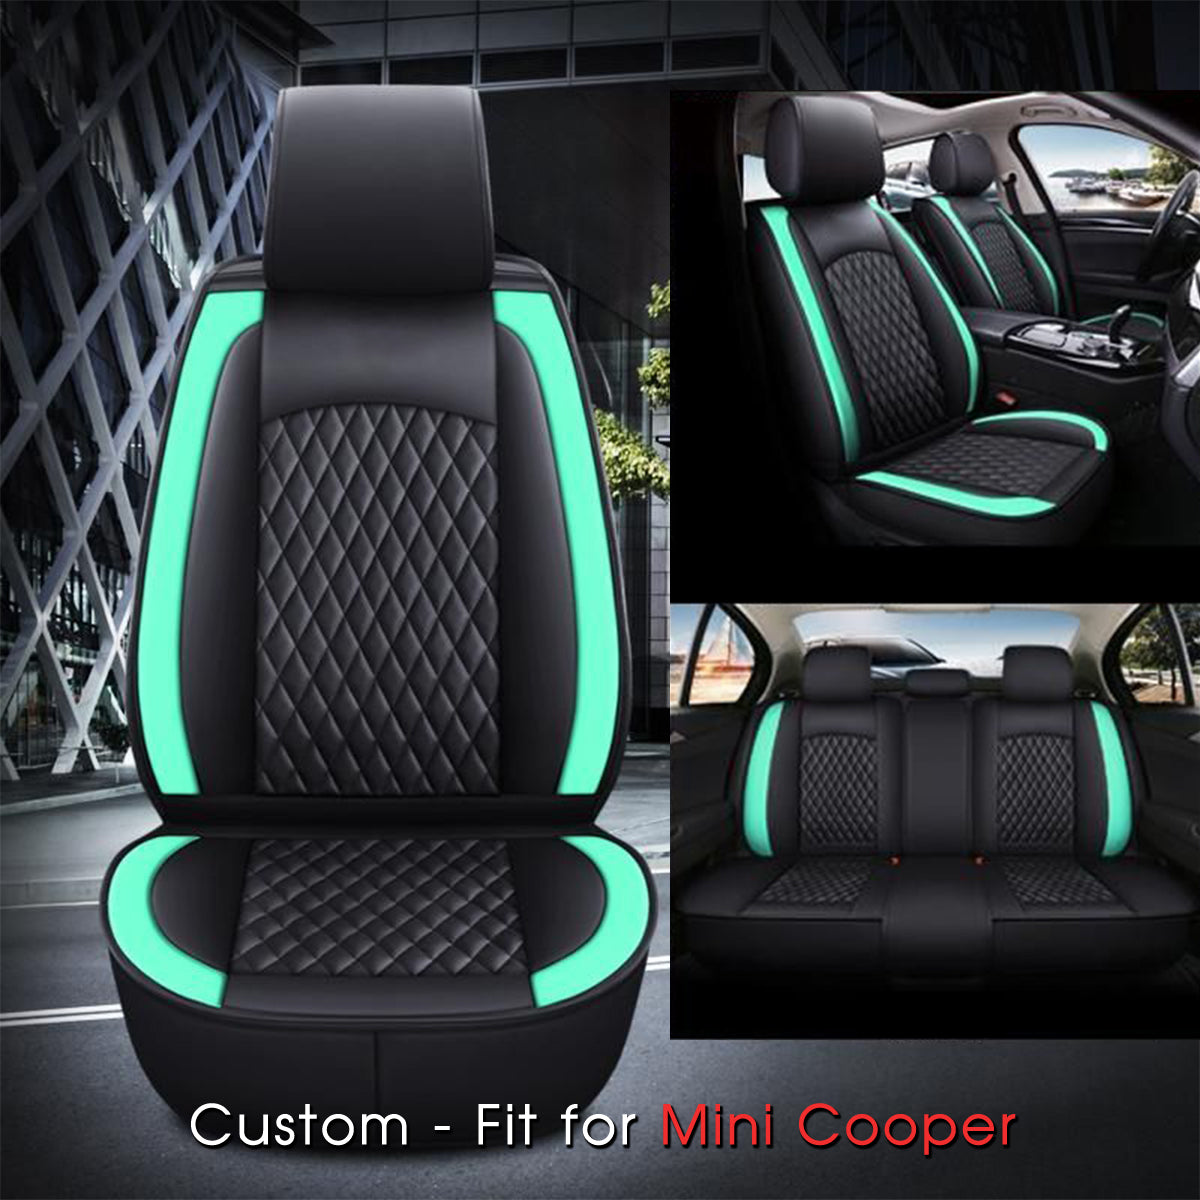 2 Car Seat Covers Full Set, Custom-Fit For Car, Waterproof Leather Front Rear Seat Automotive Protection Cushions, Car Accessories DLMT211